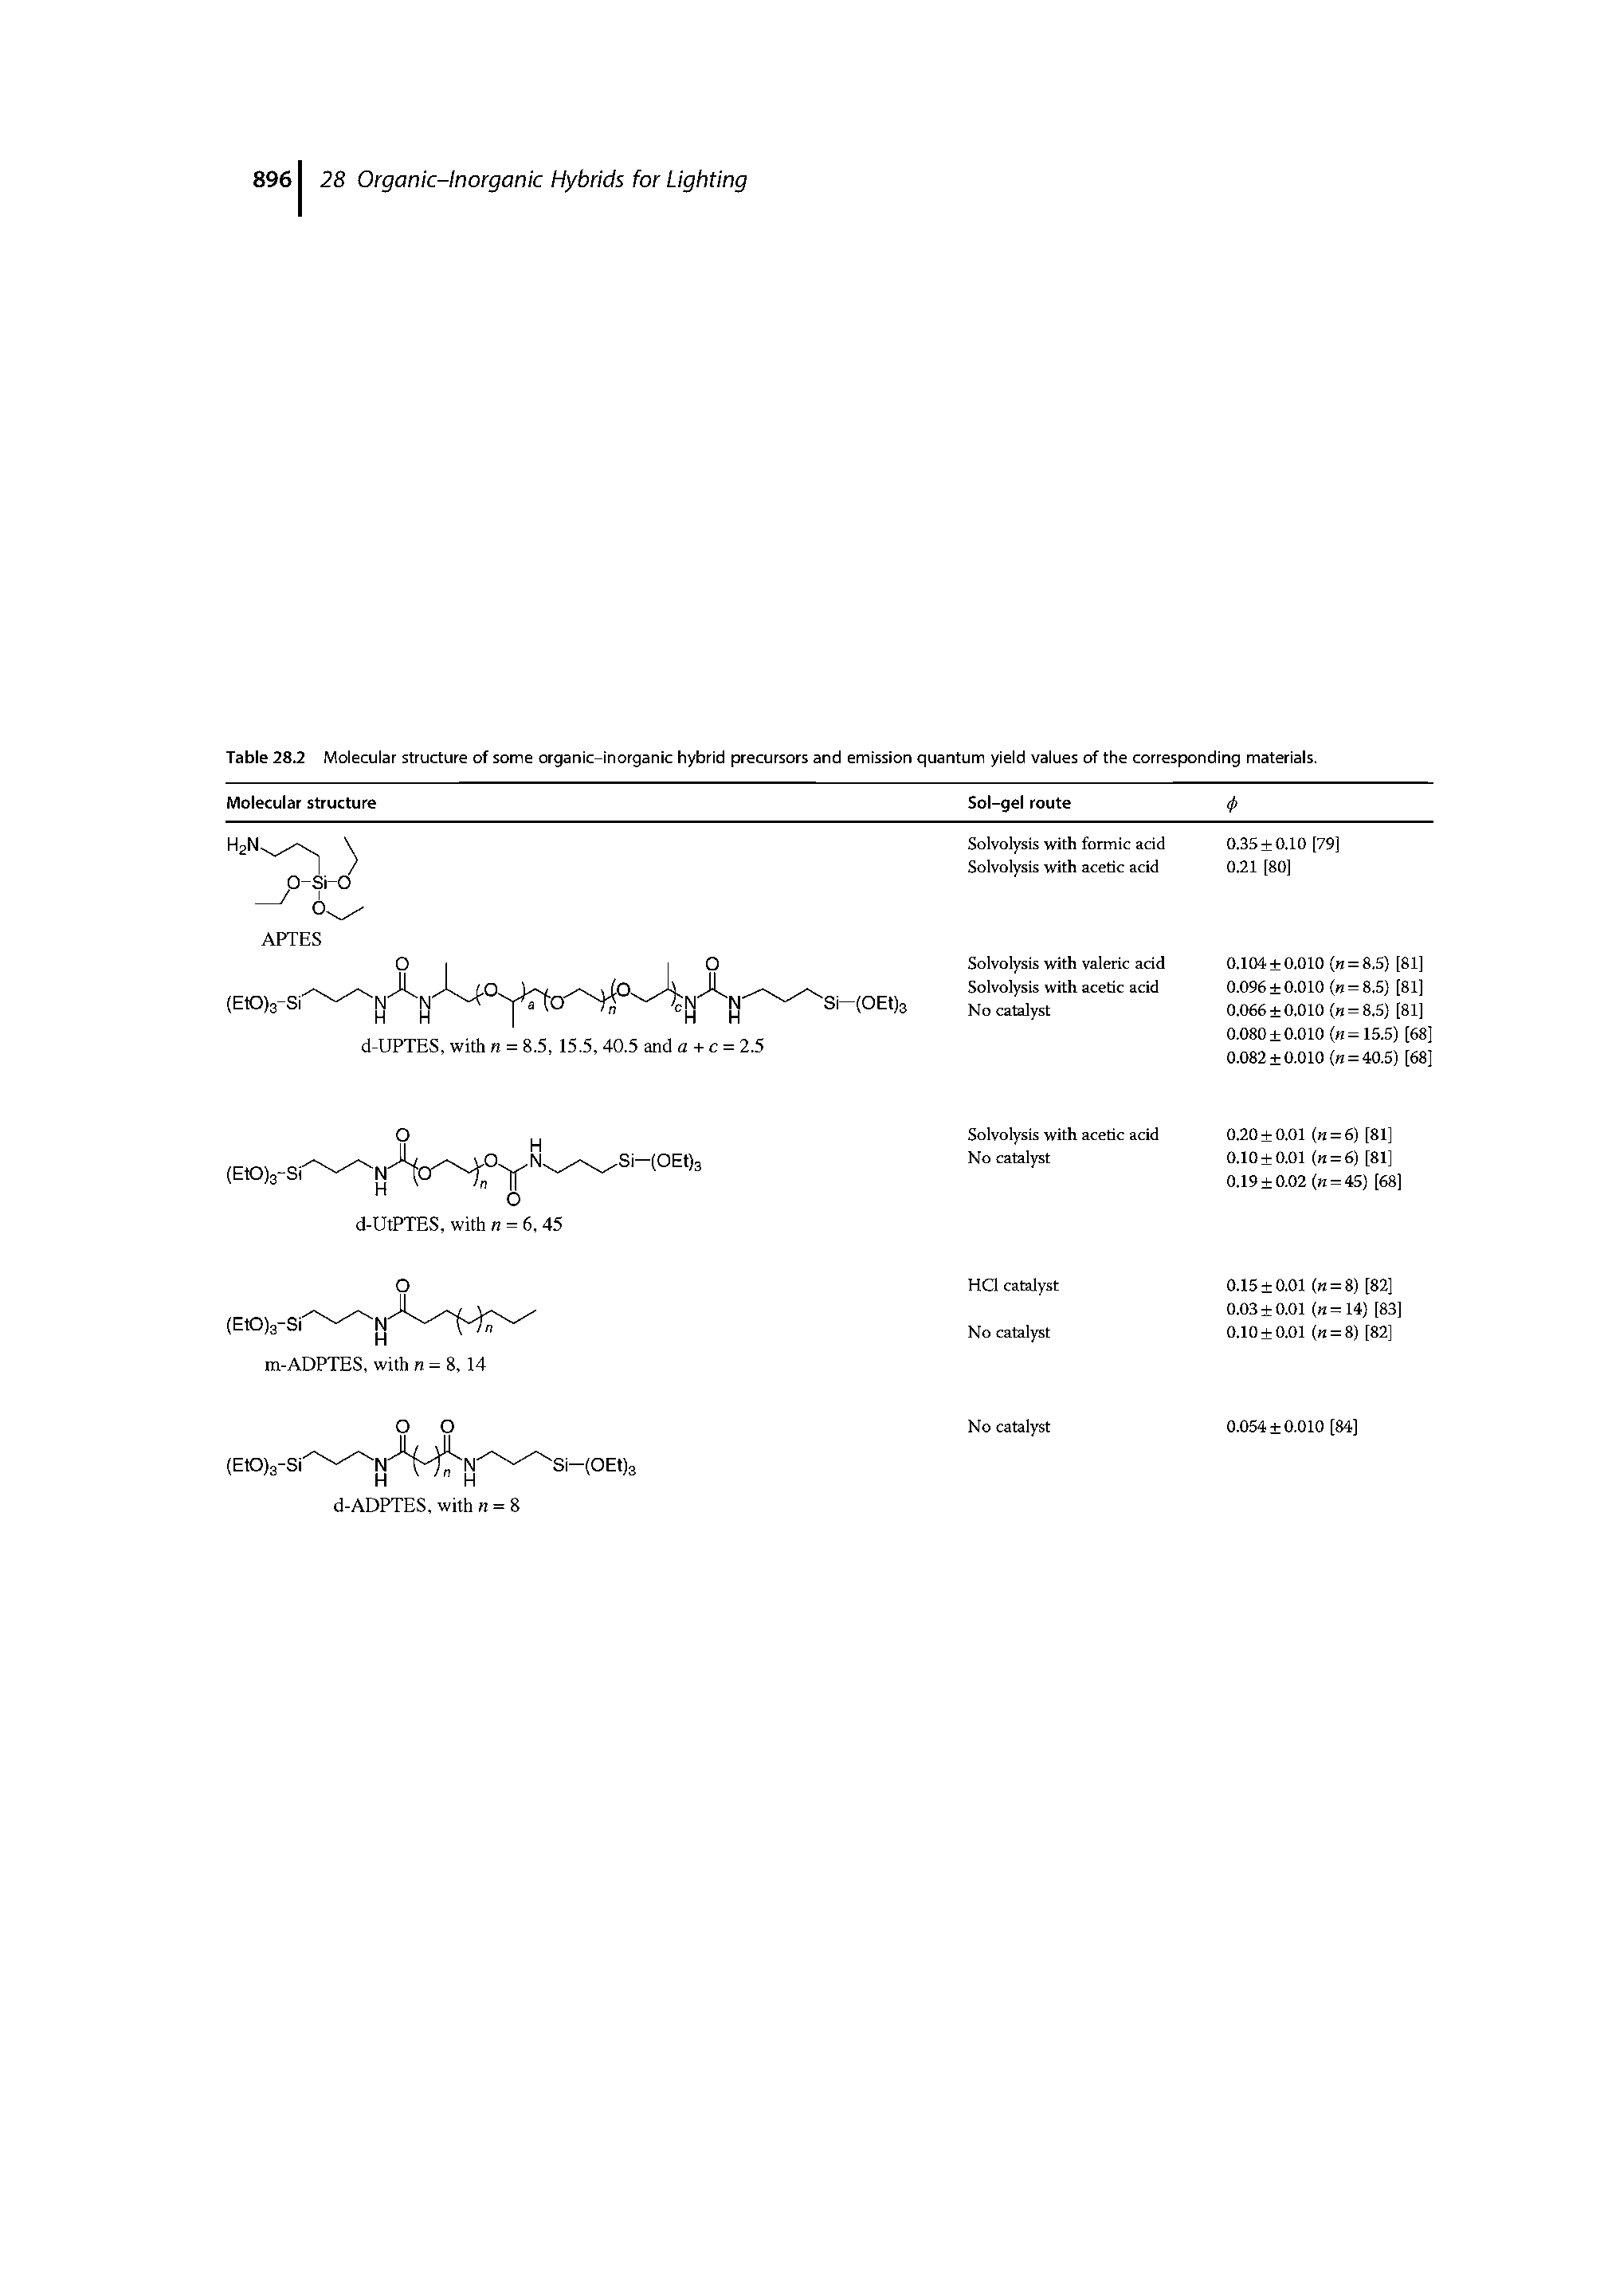 Table 28.2 Molecular structure of some organic-inorganic hybrid precursors and emission quantum yield values of the corresponding materials.